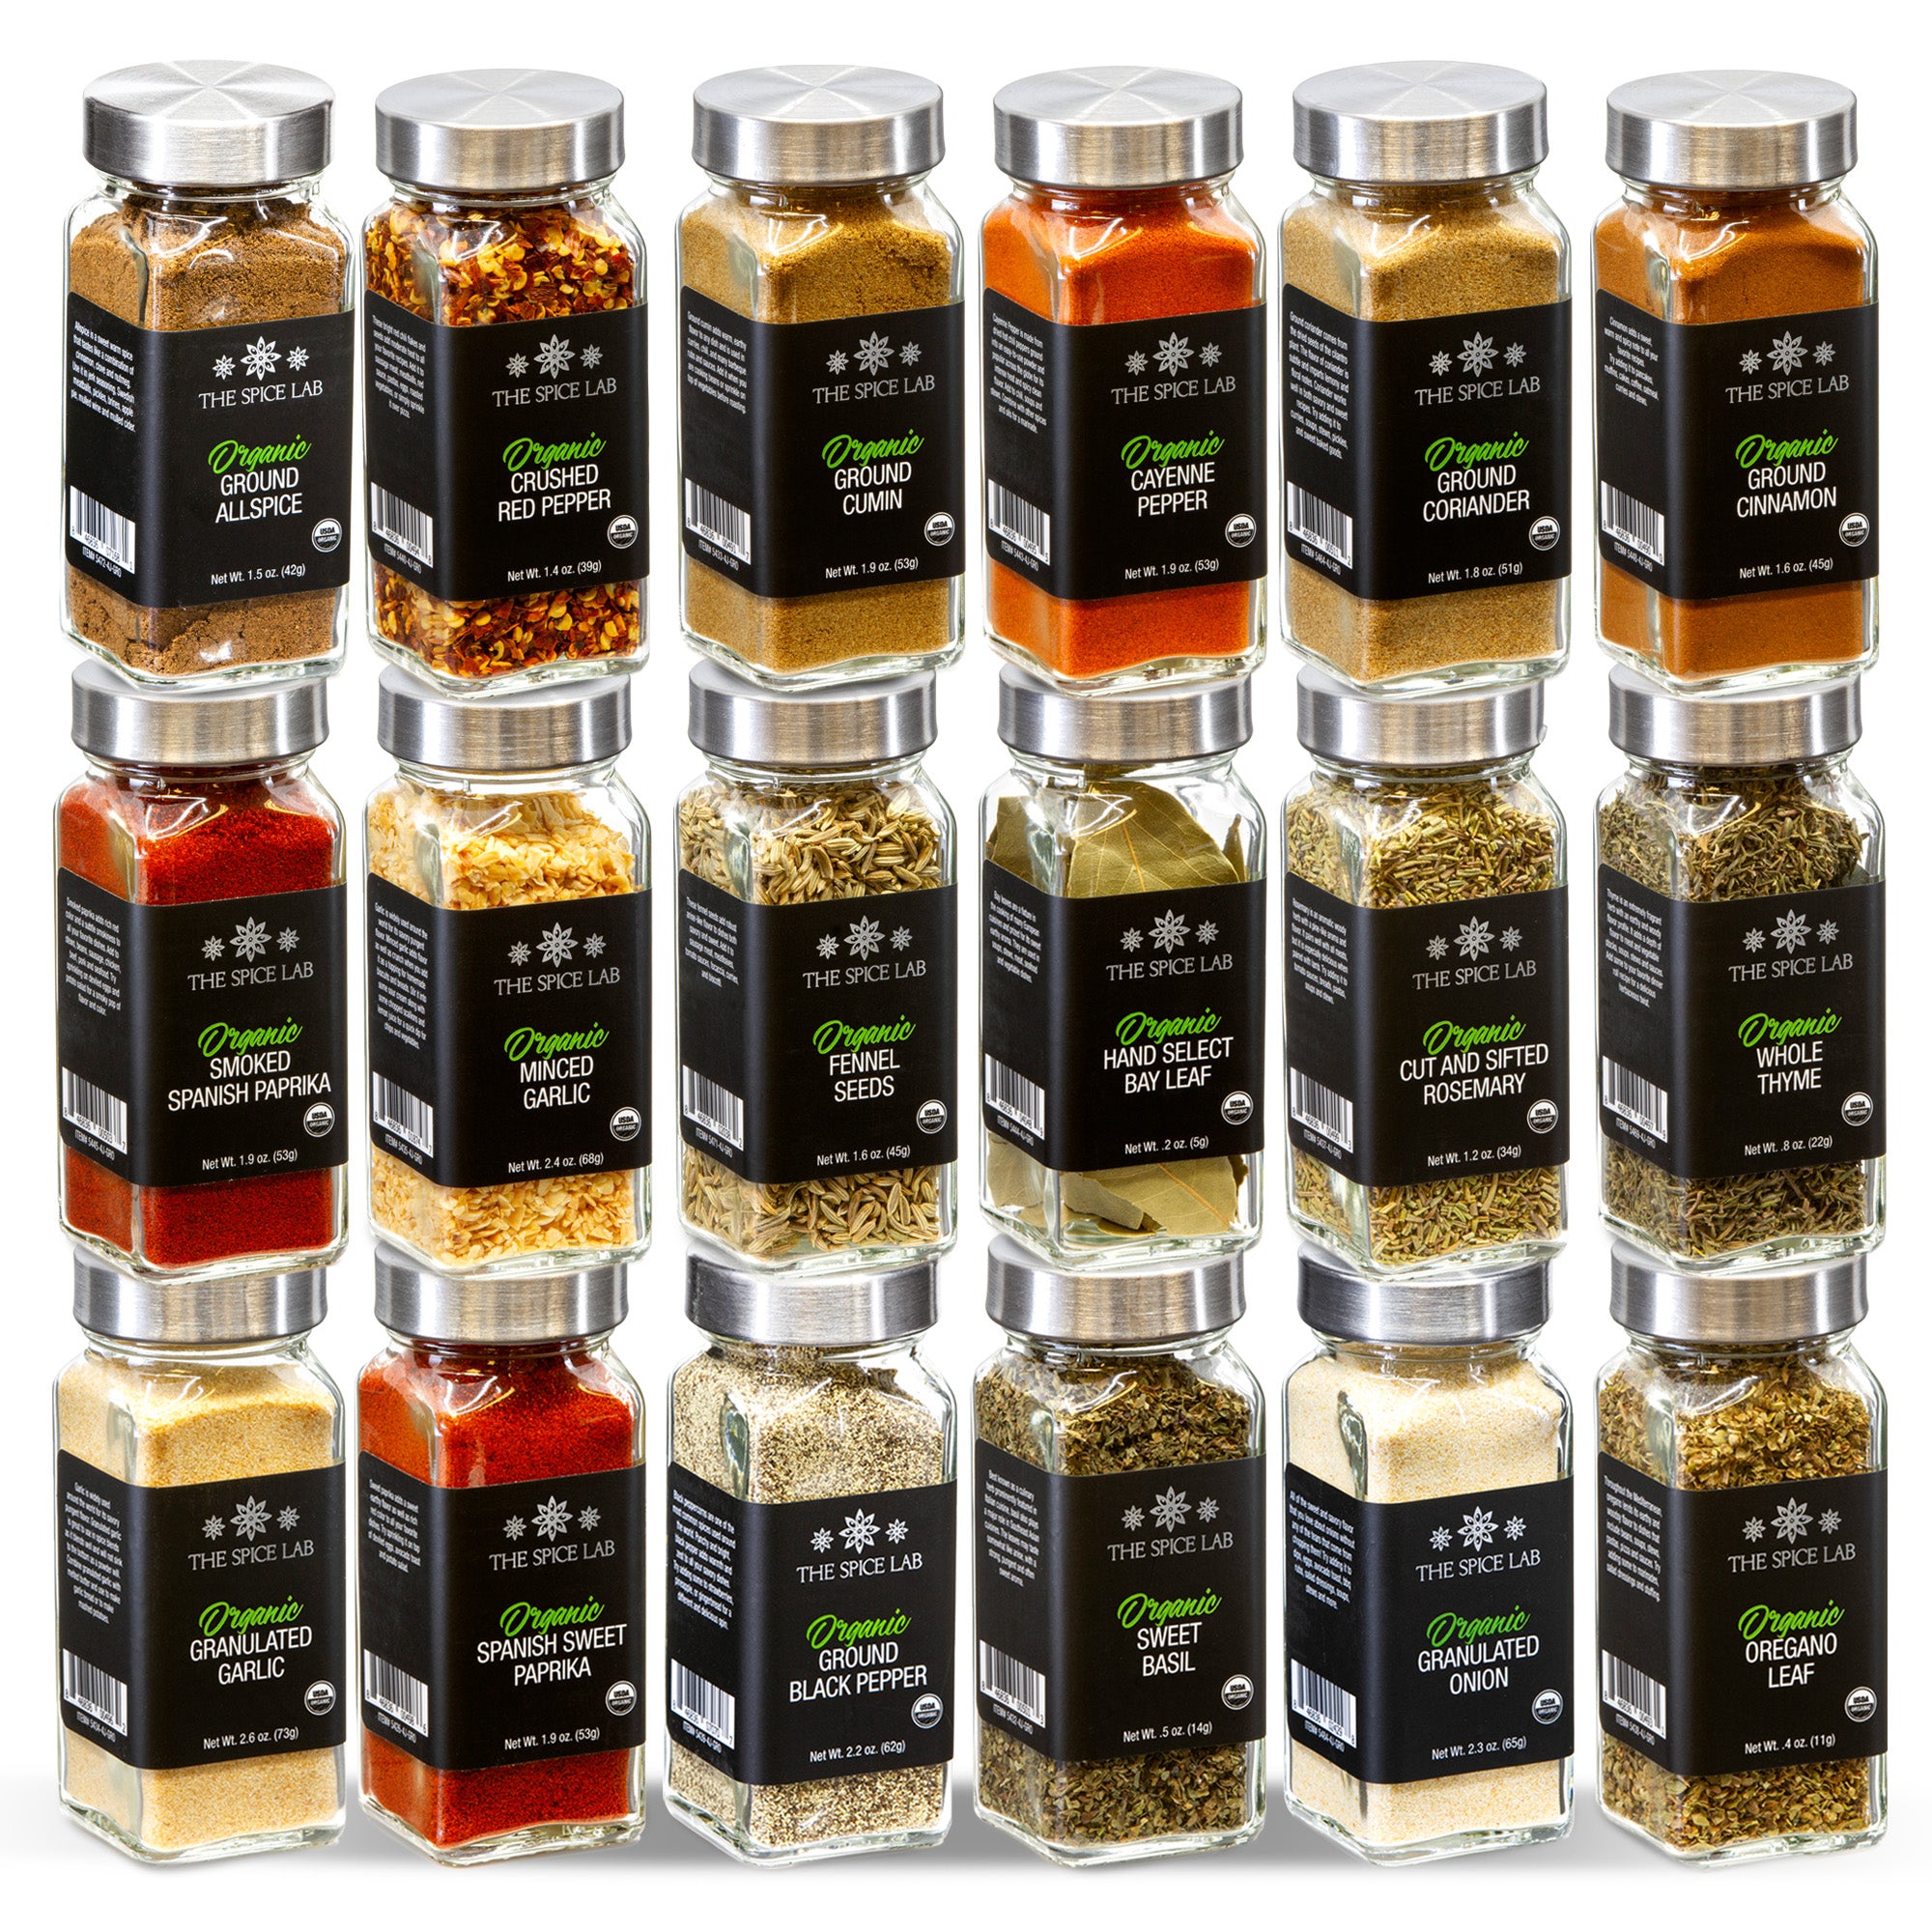 Organic Spice Gift Sets - Gourmet Spice Collections - Cooking Spice Sets